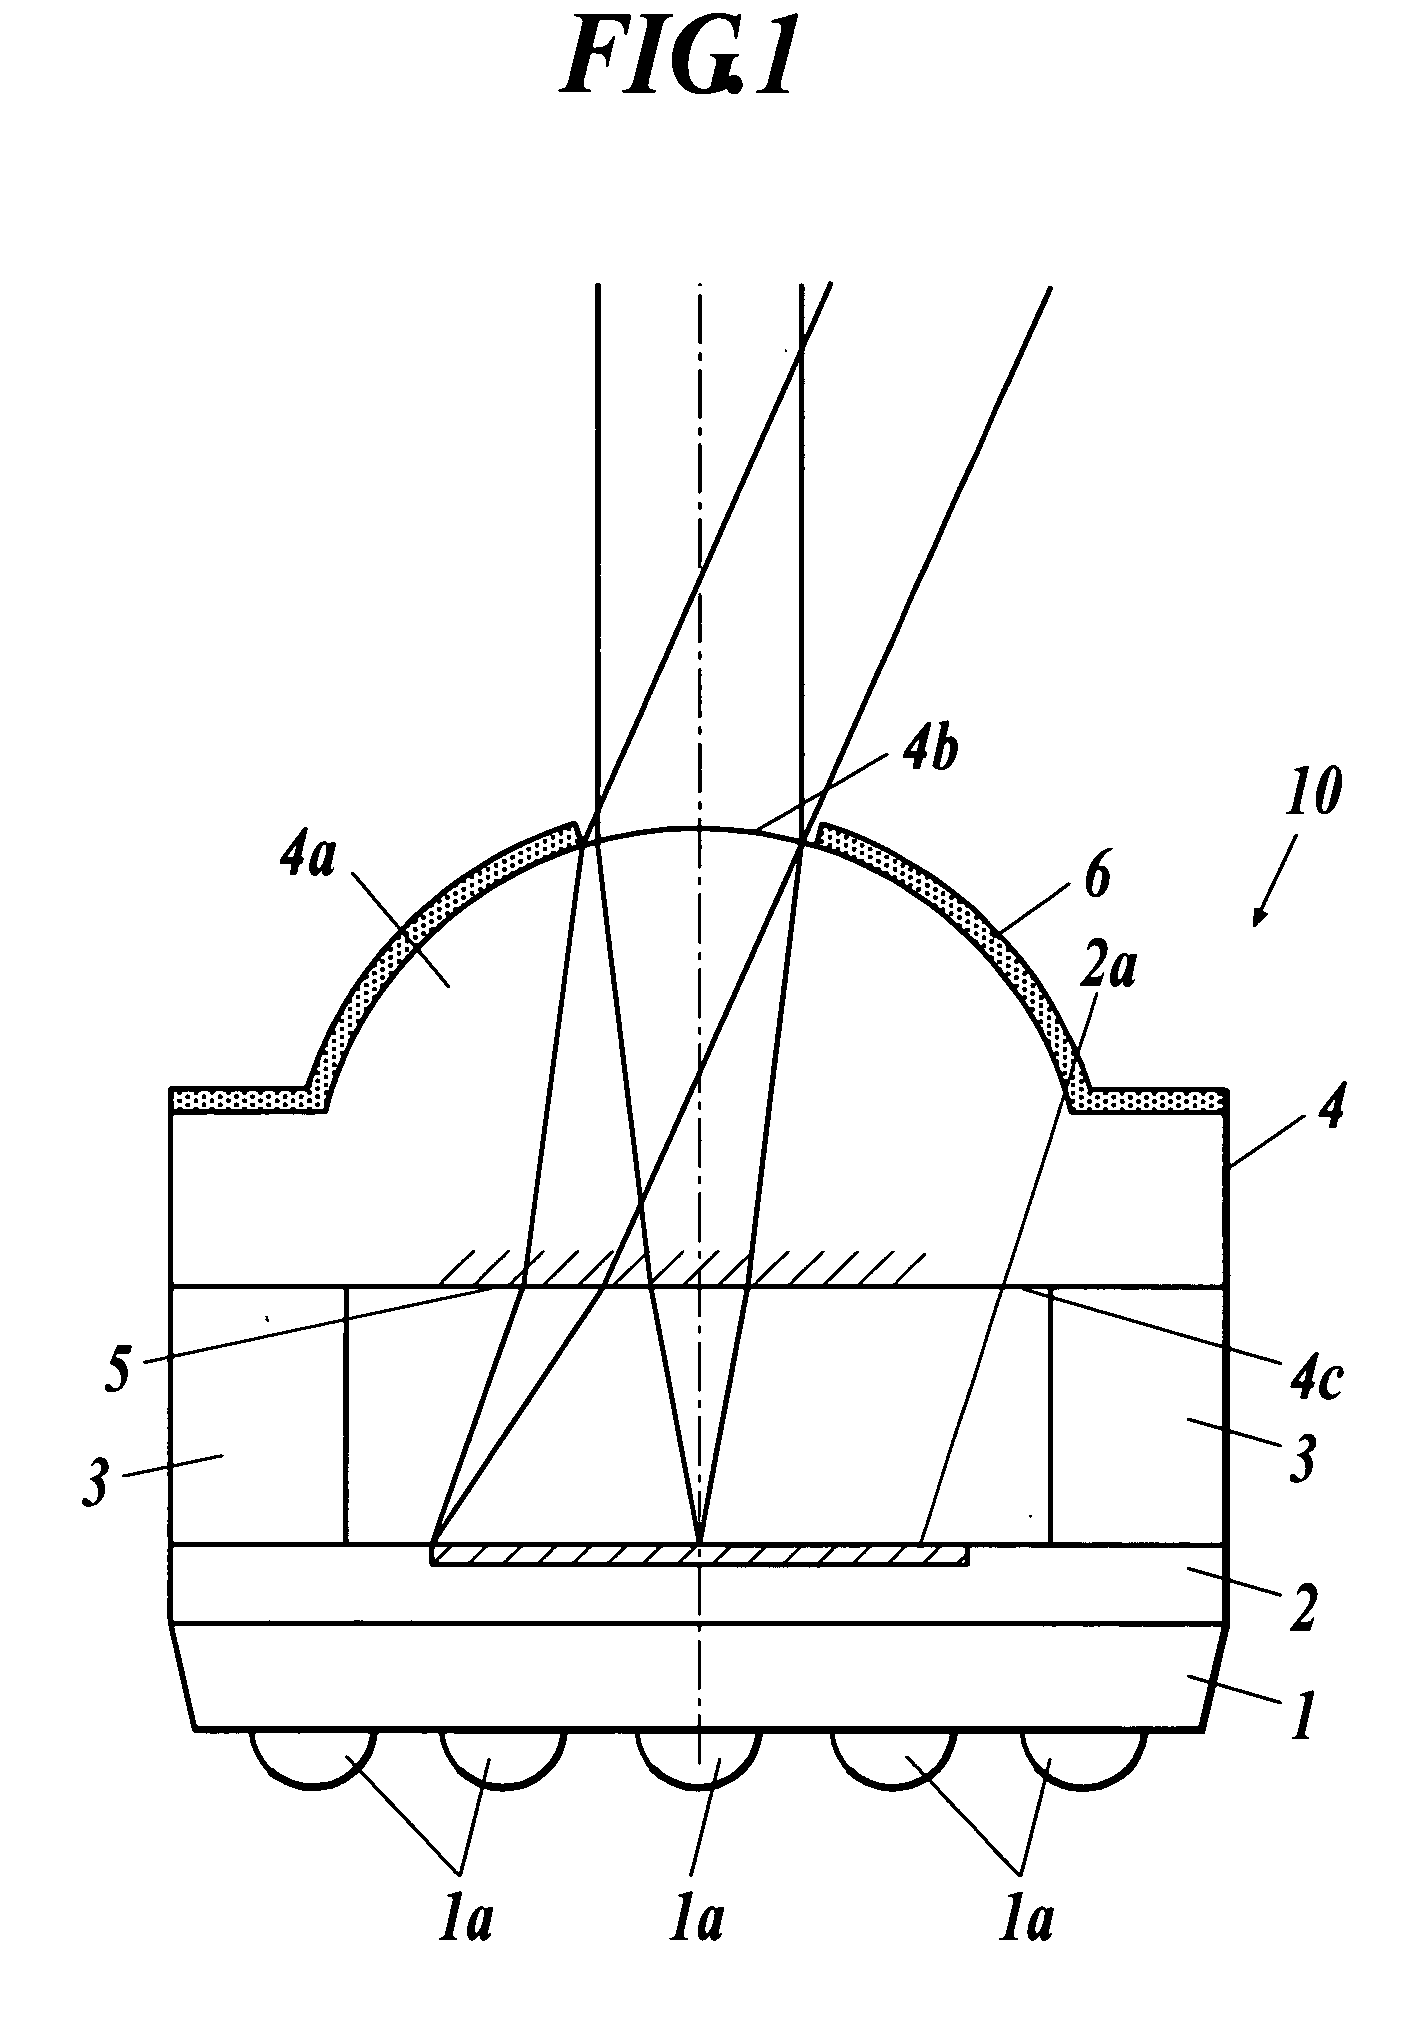 Solid-state image pickup device and the manufacture method thereof